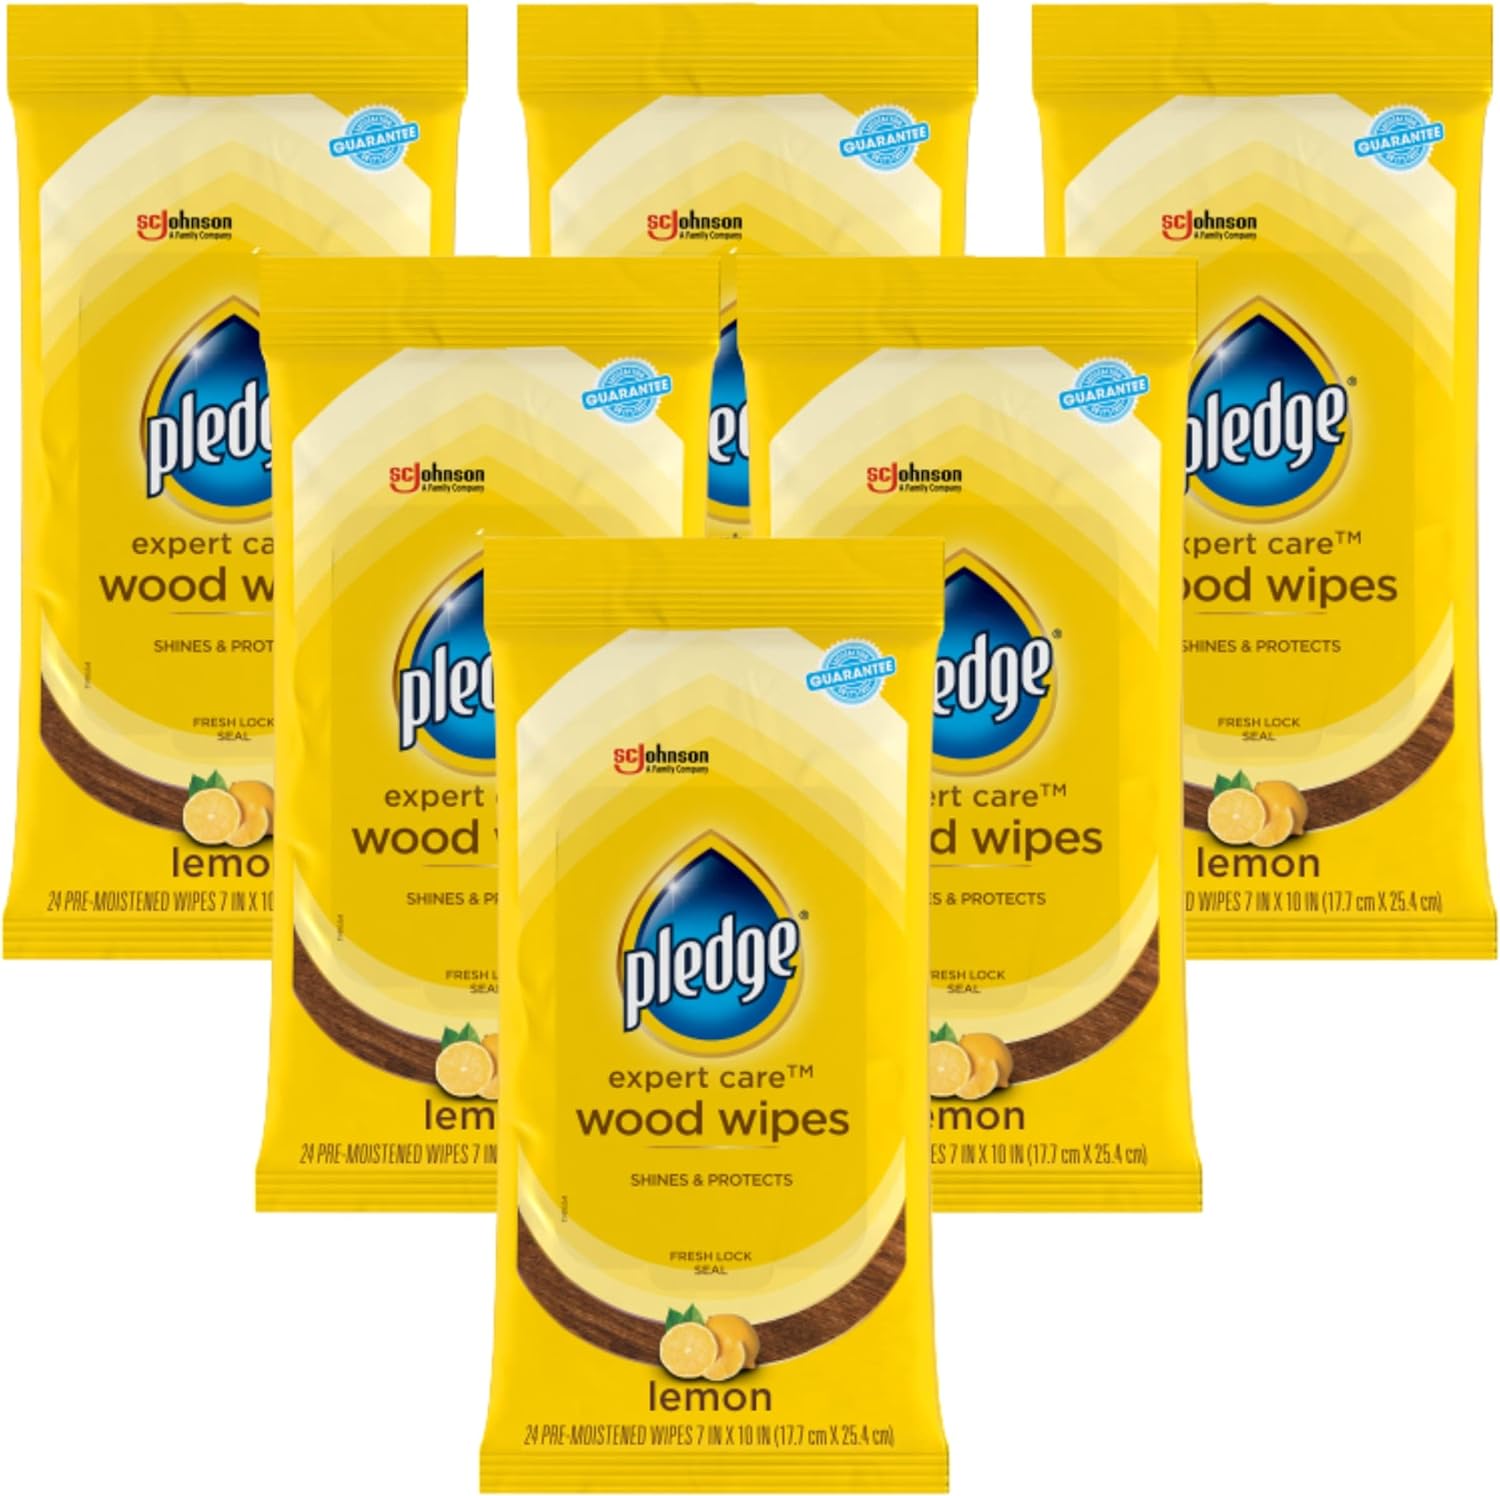 Pledge Expert Care Wood Wipes, Shines and Protects, Removes Fingerprints, Lemon Scent, 24 Count (Pack of 6)